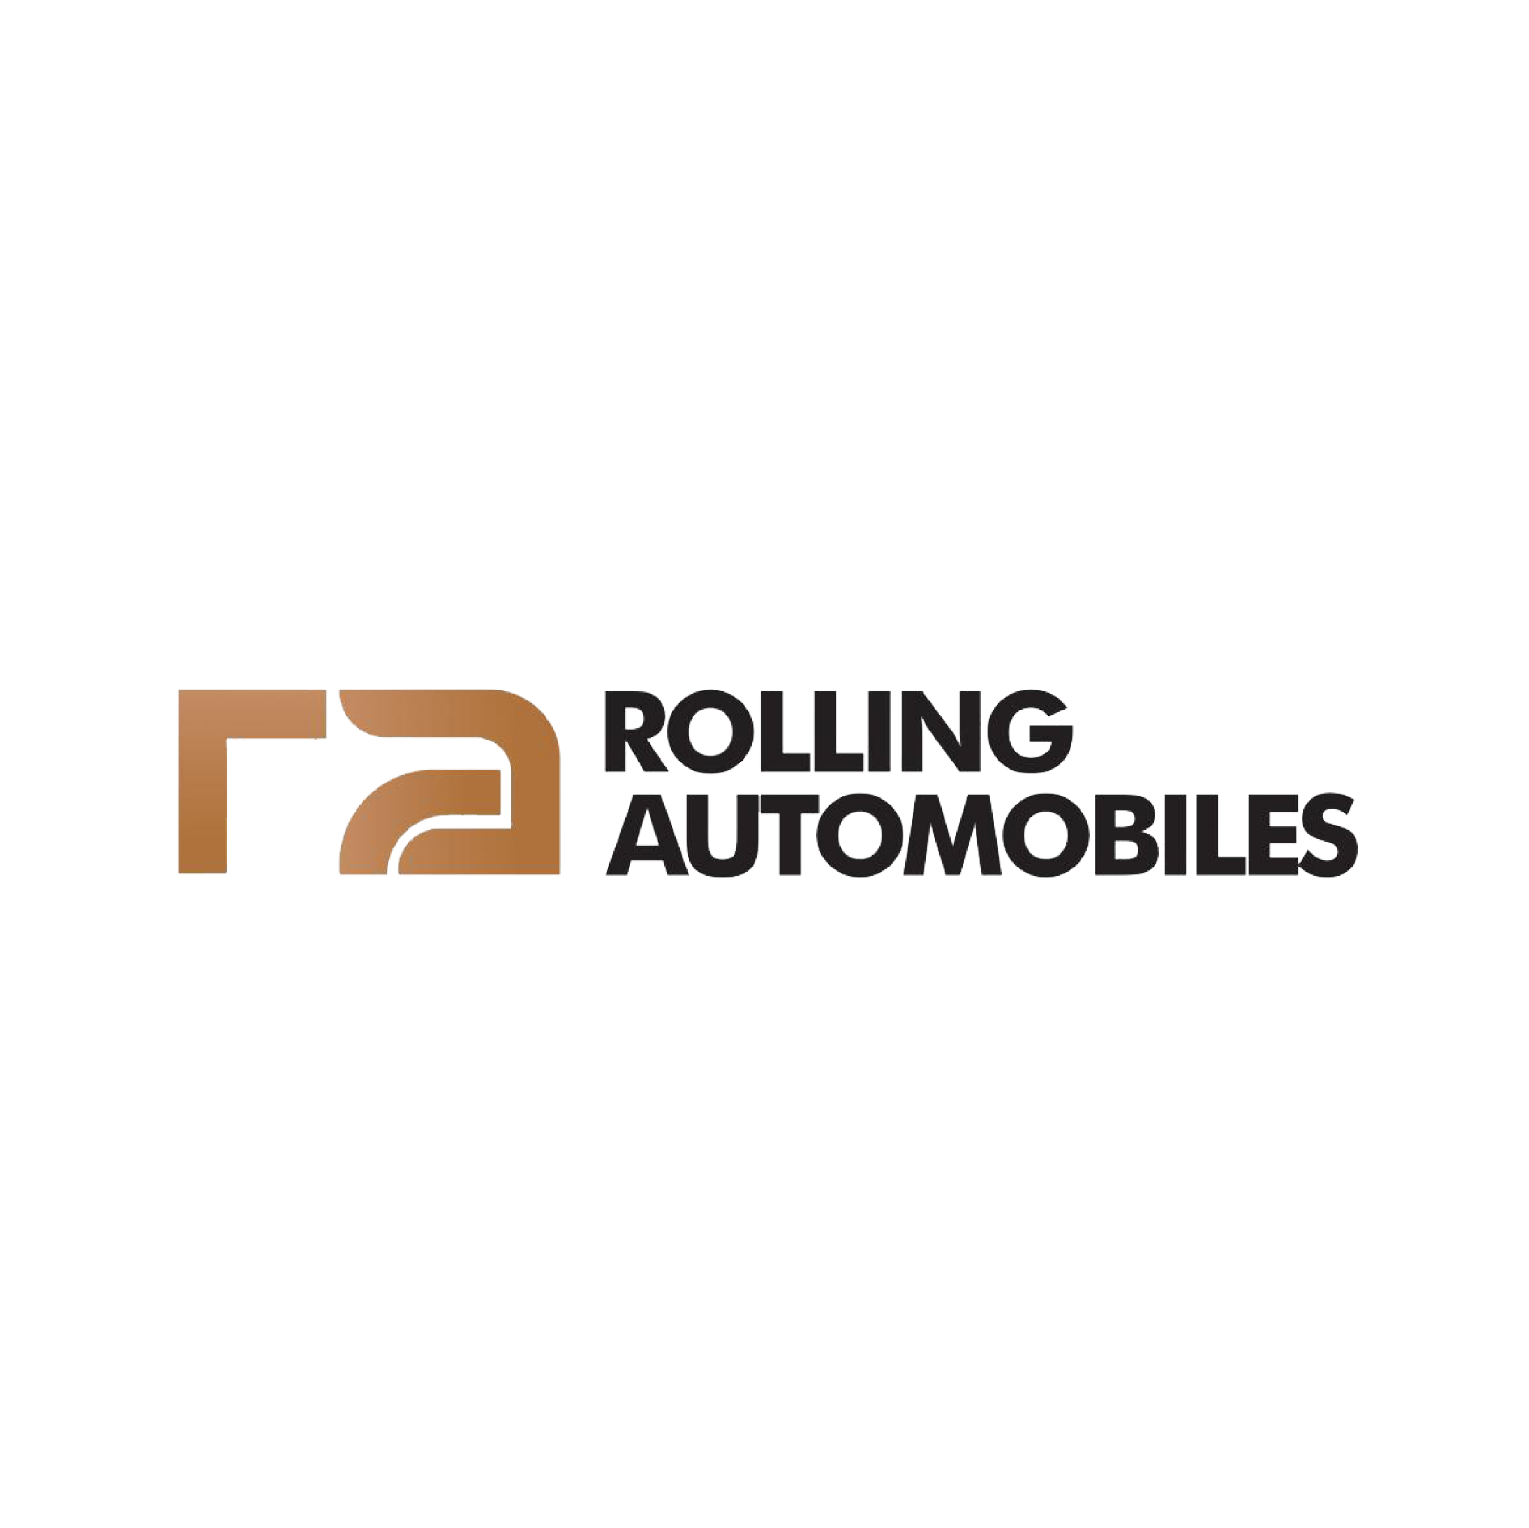 Rolling Automobiles Limited